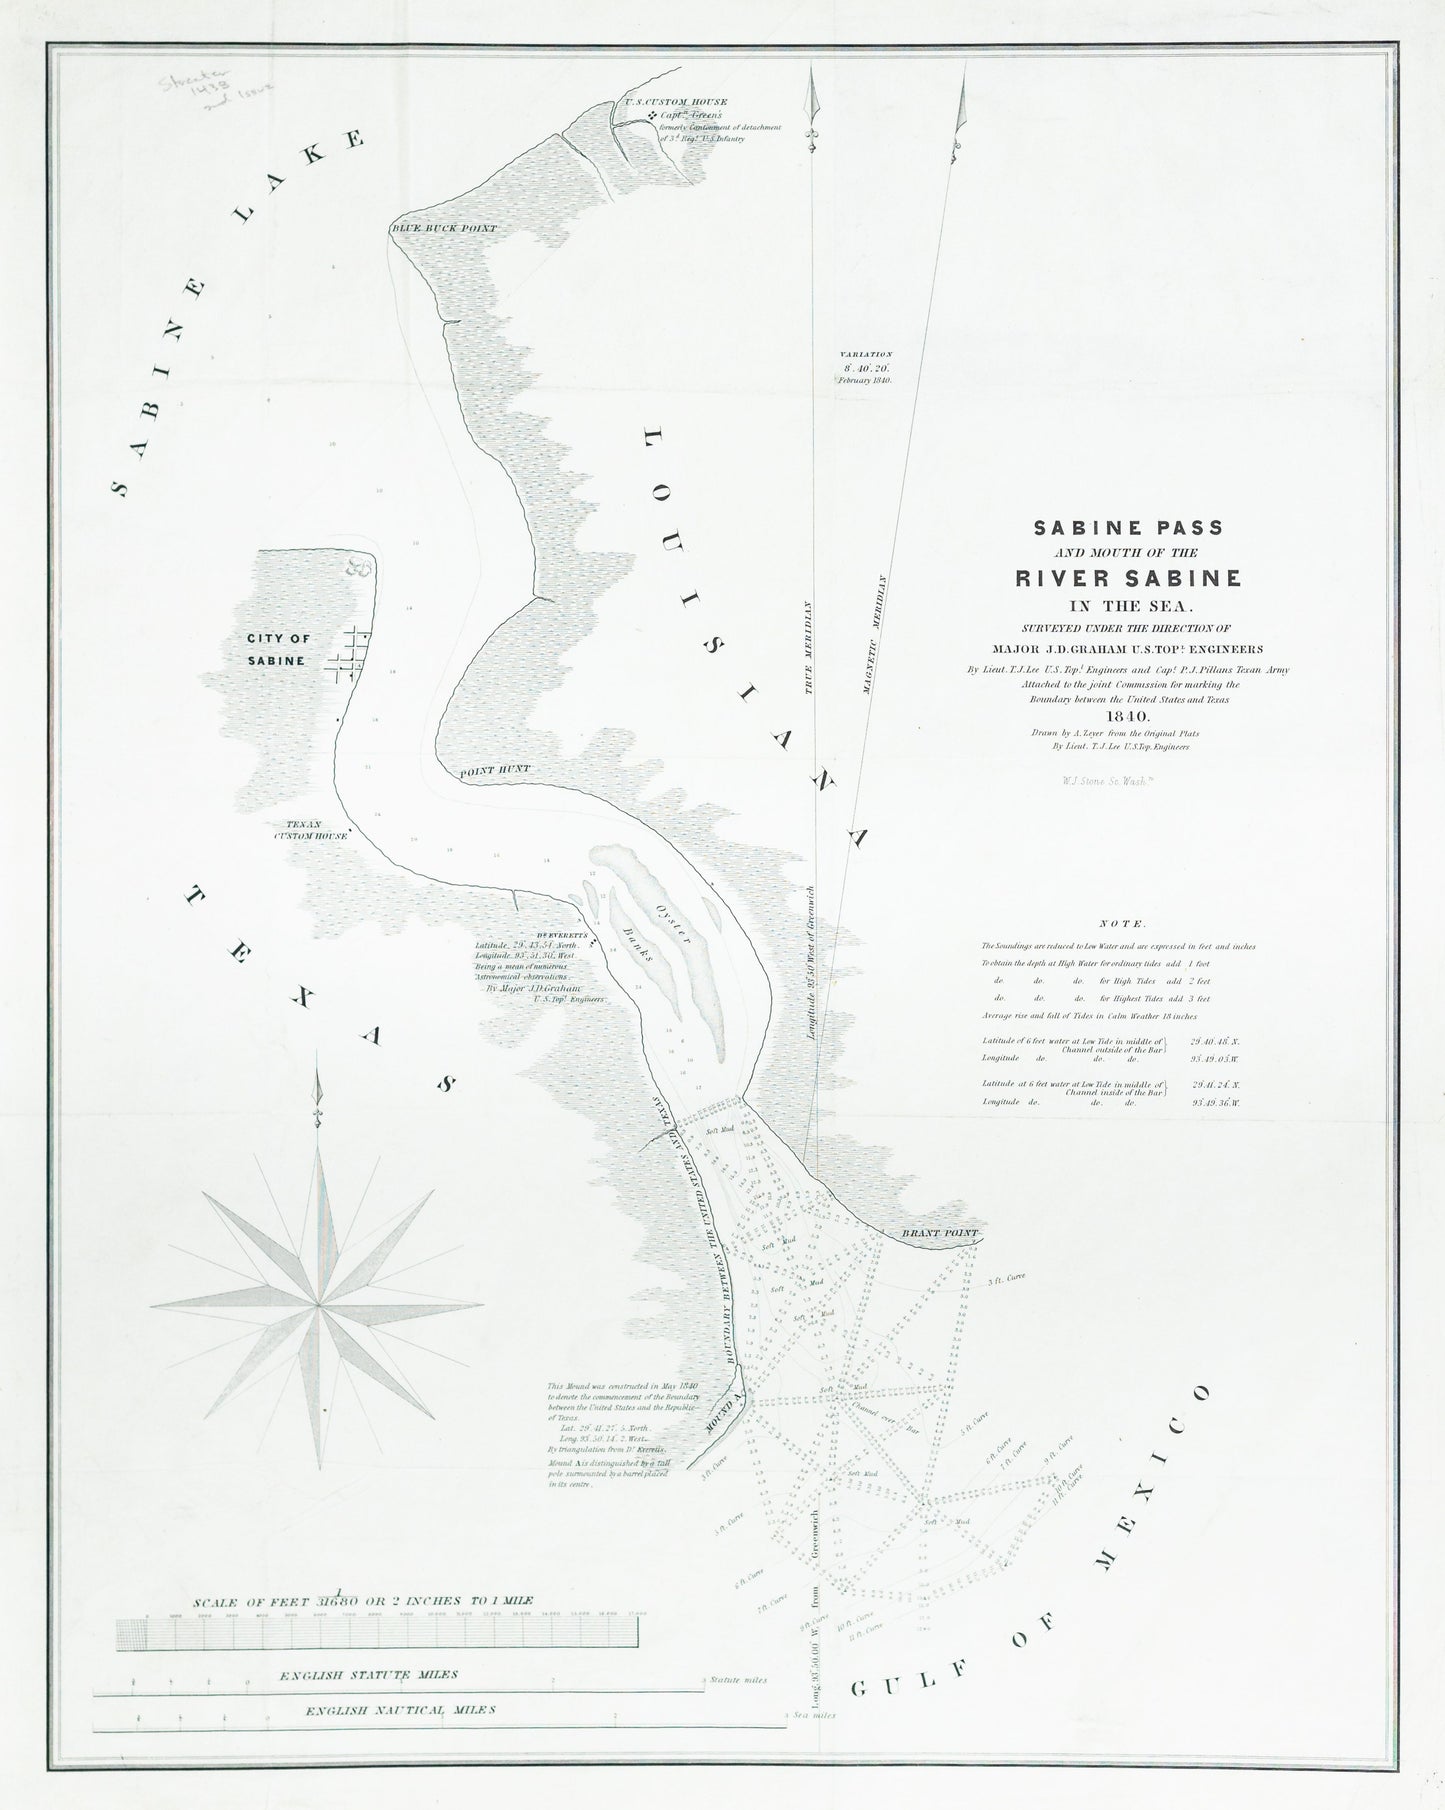 Lee, T.J..  Sabine Pass and mouth of the river Sabine in the Sea.  1842?.